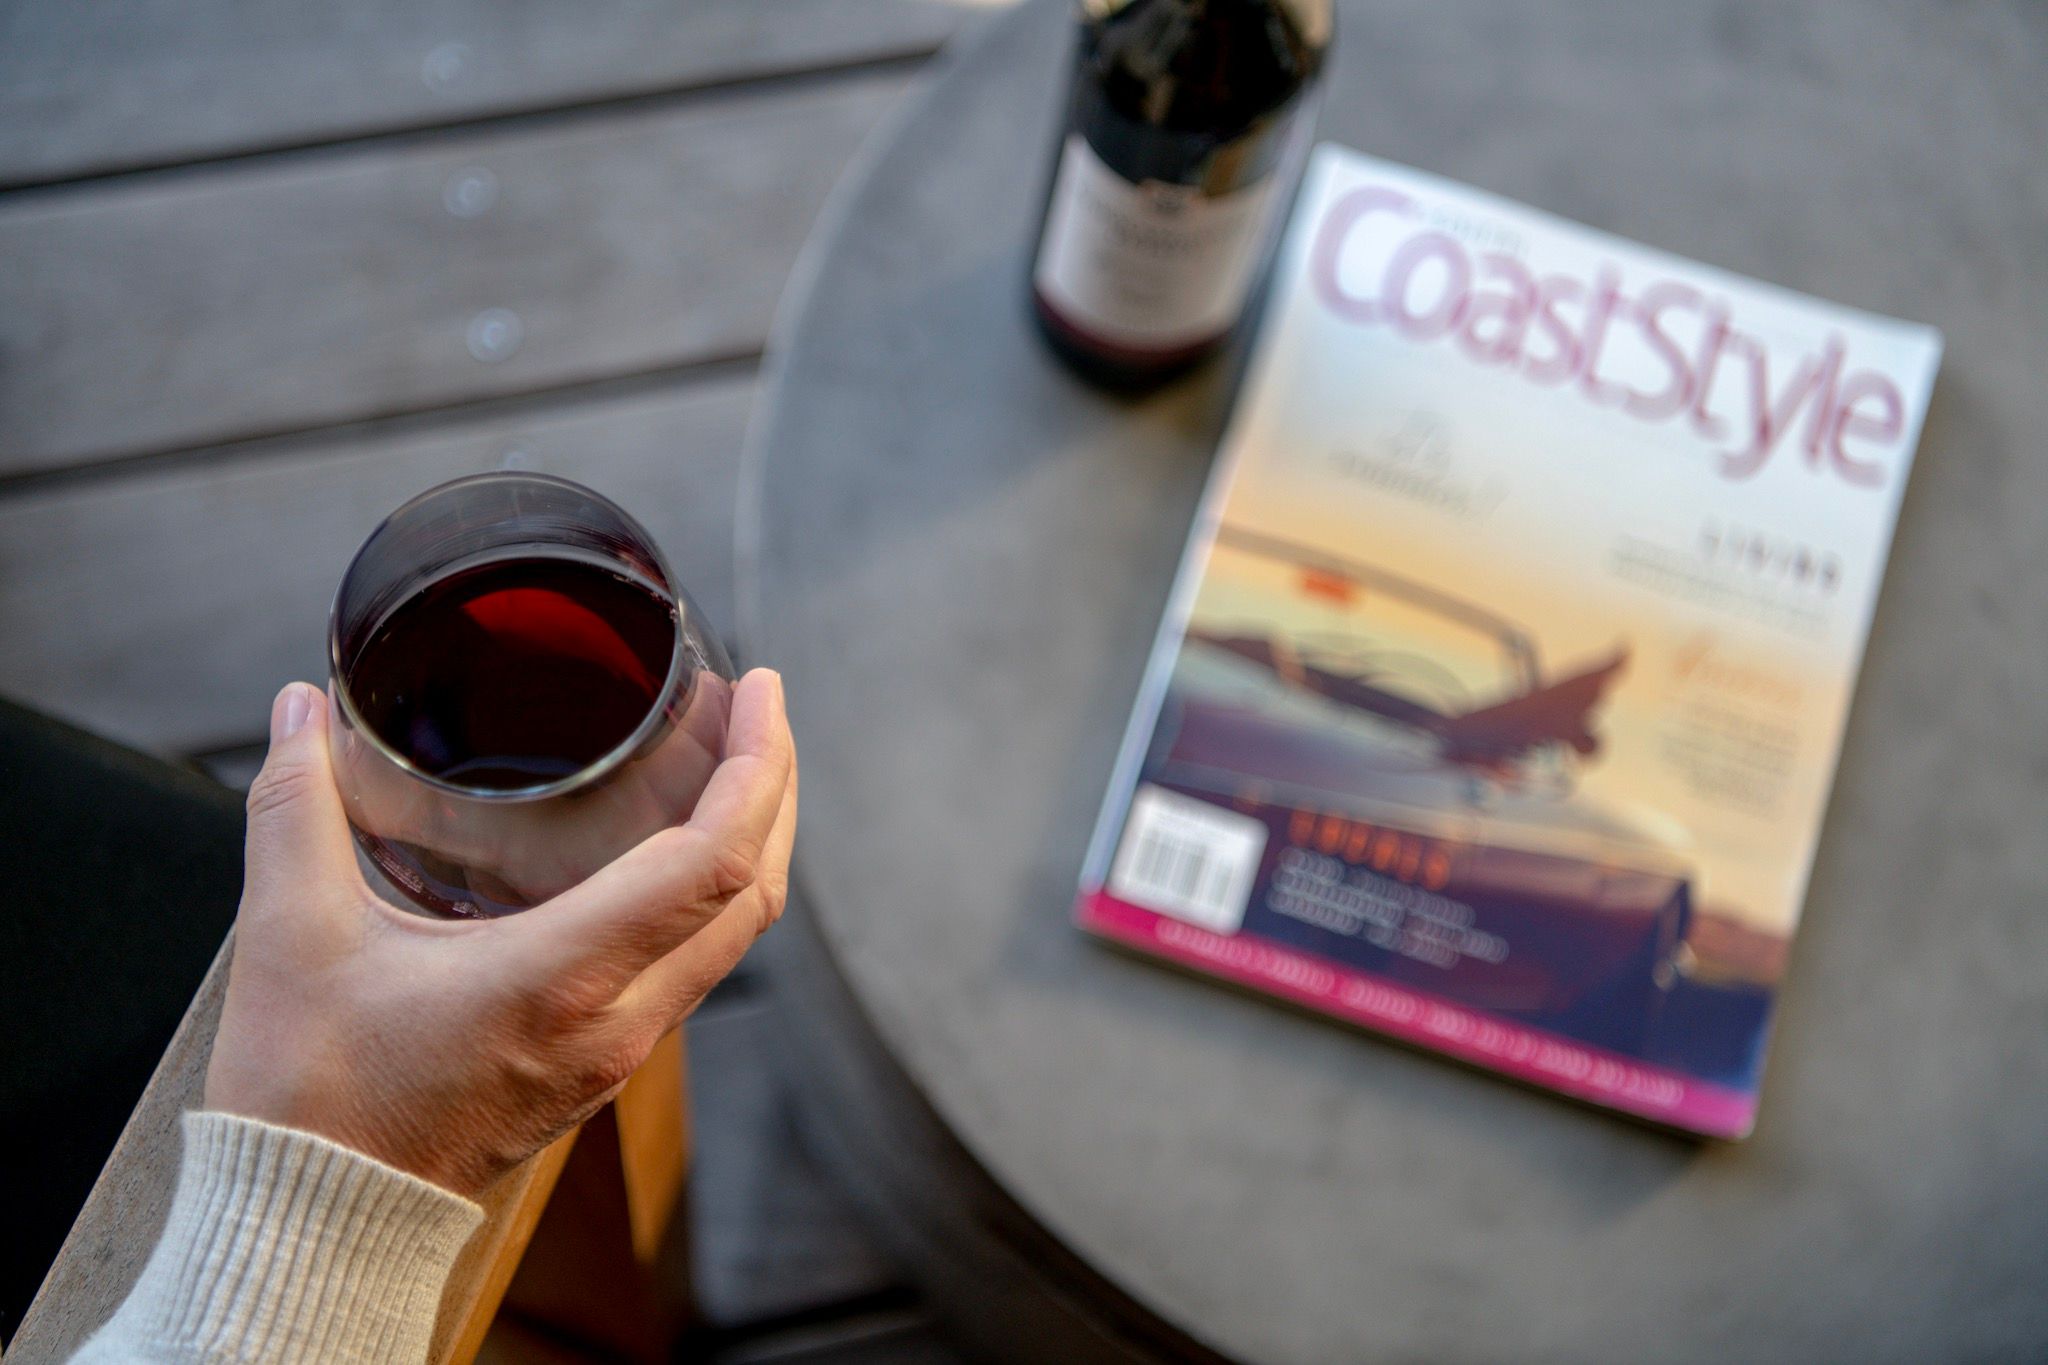 a hand holding red wine, and a magazine on table with bottle of red wine